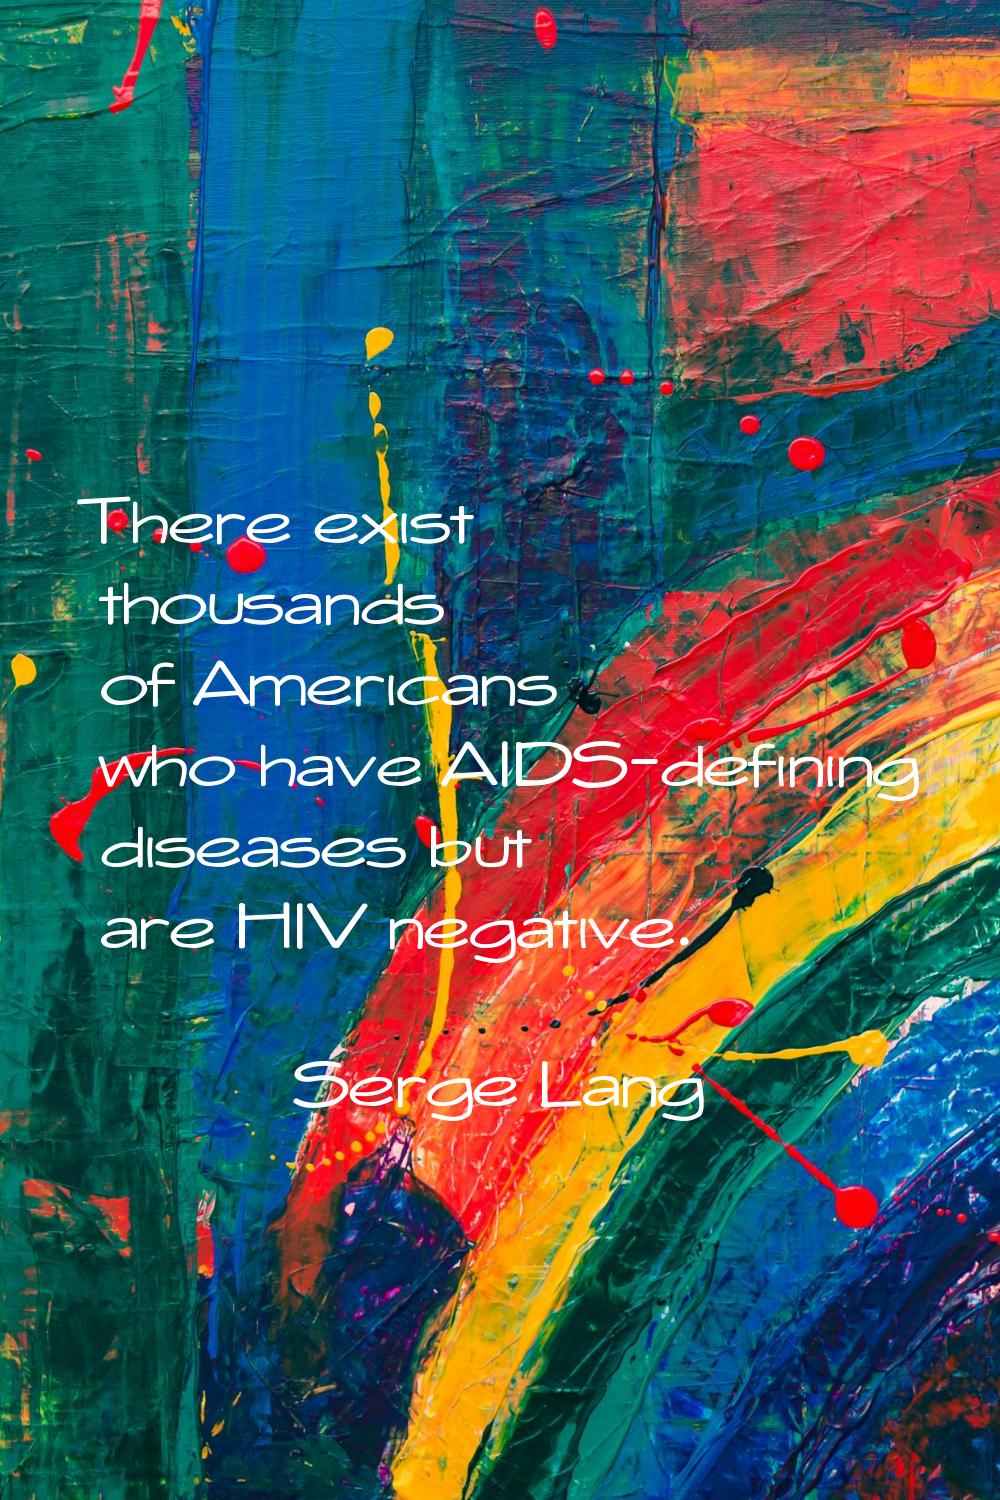 There exist thousands of Americans who have AIDS-defining diseases but are HIV negative.